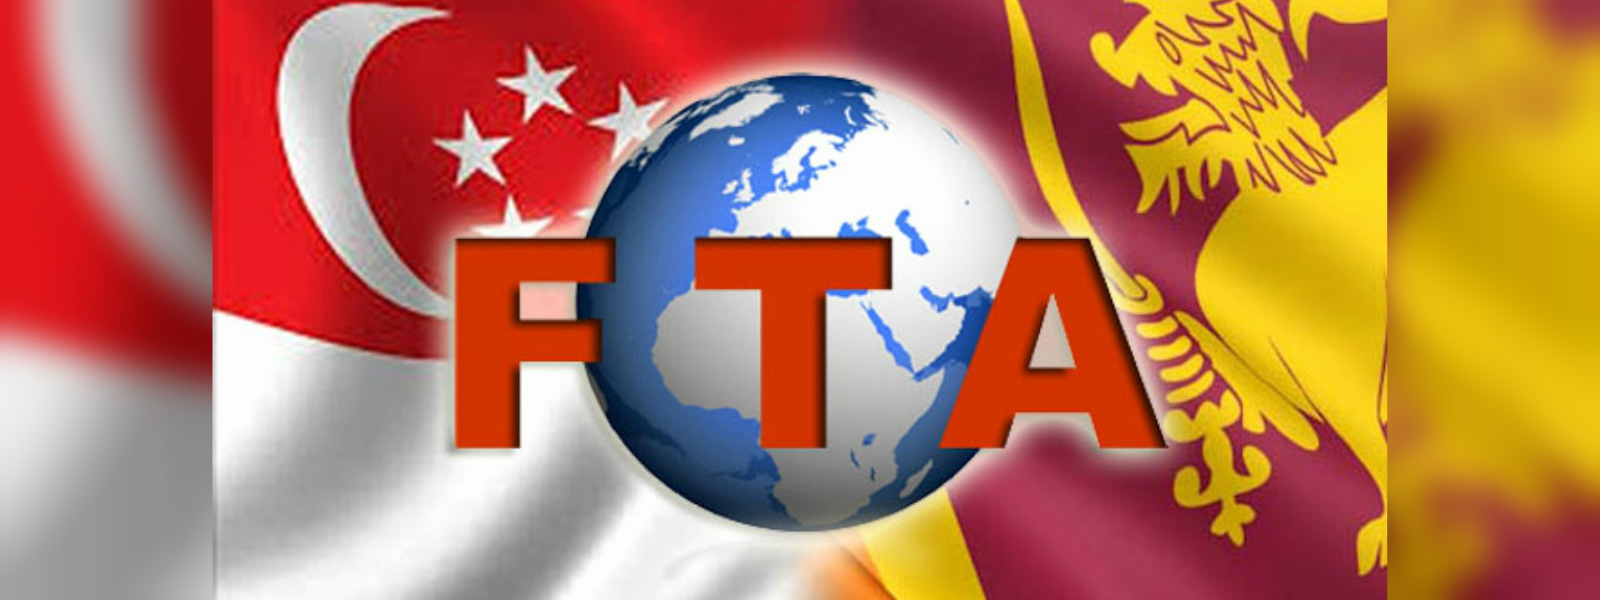 Further action on Sin. FTA temporarily suspended